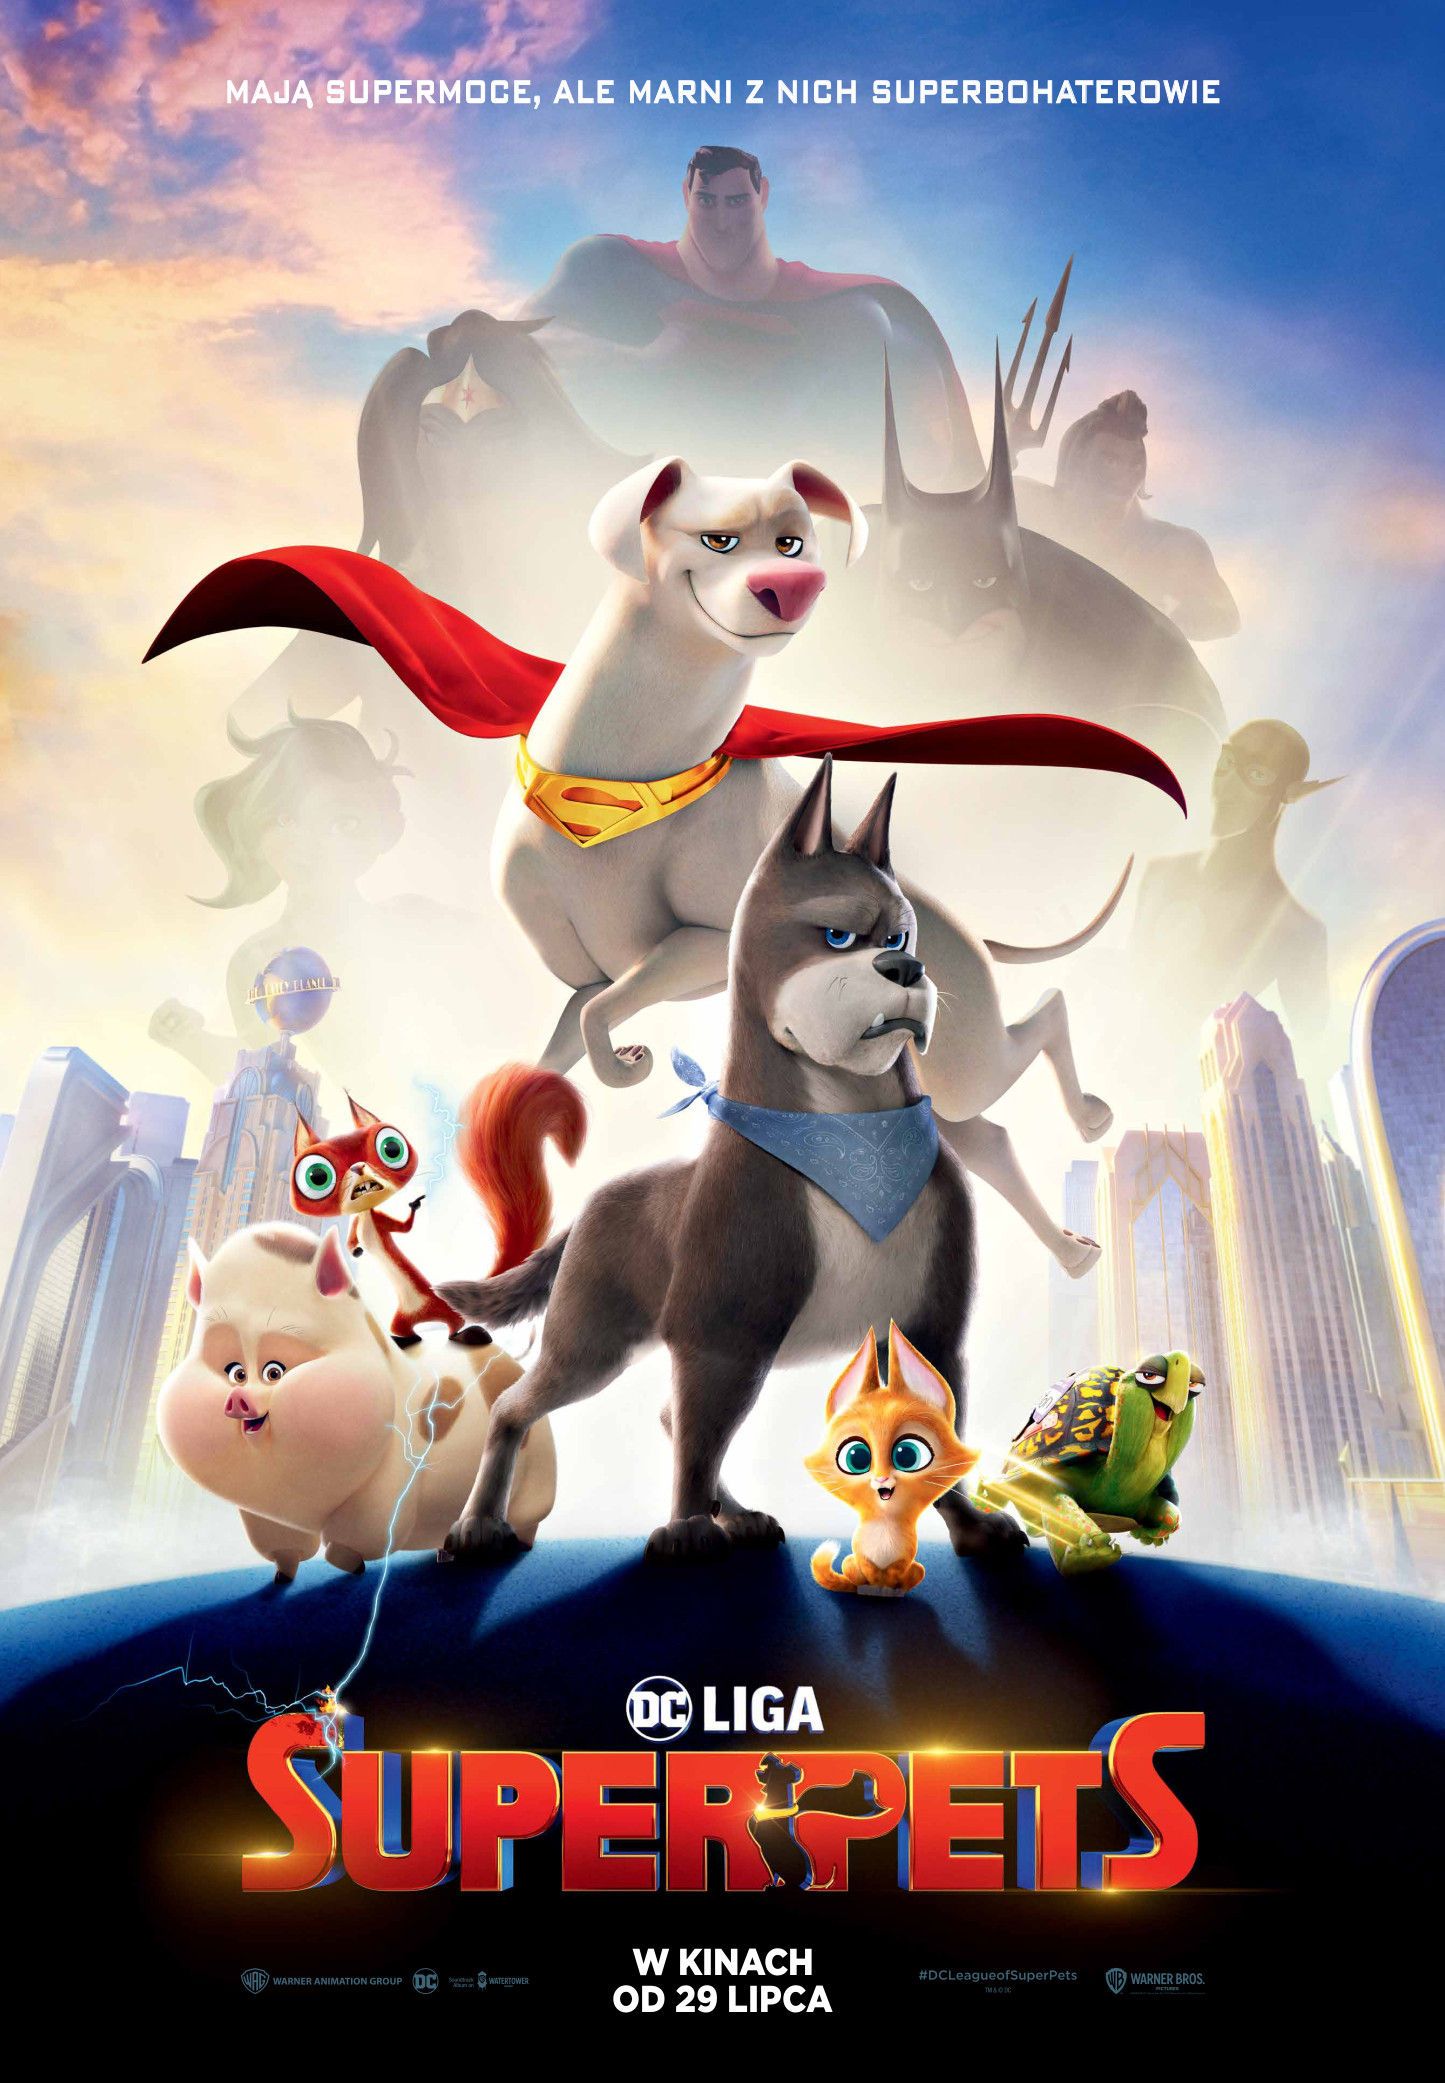 DC League of Super-Pets (2022) Hindi Dubbed HDRip download full movie